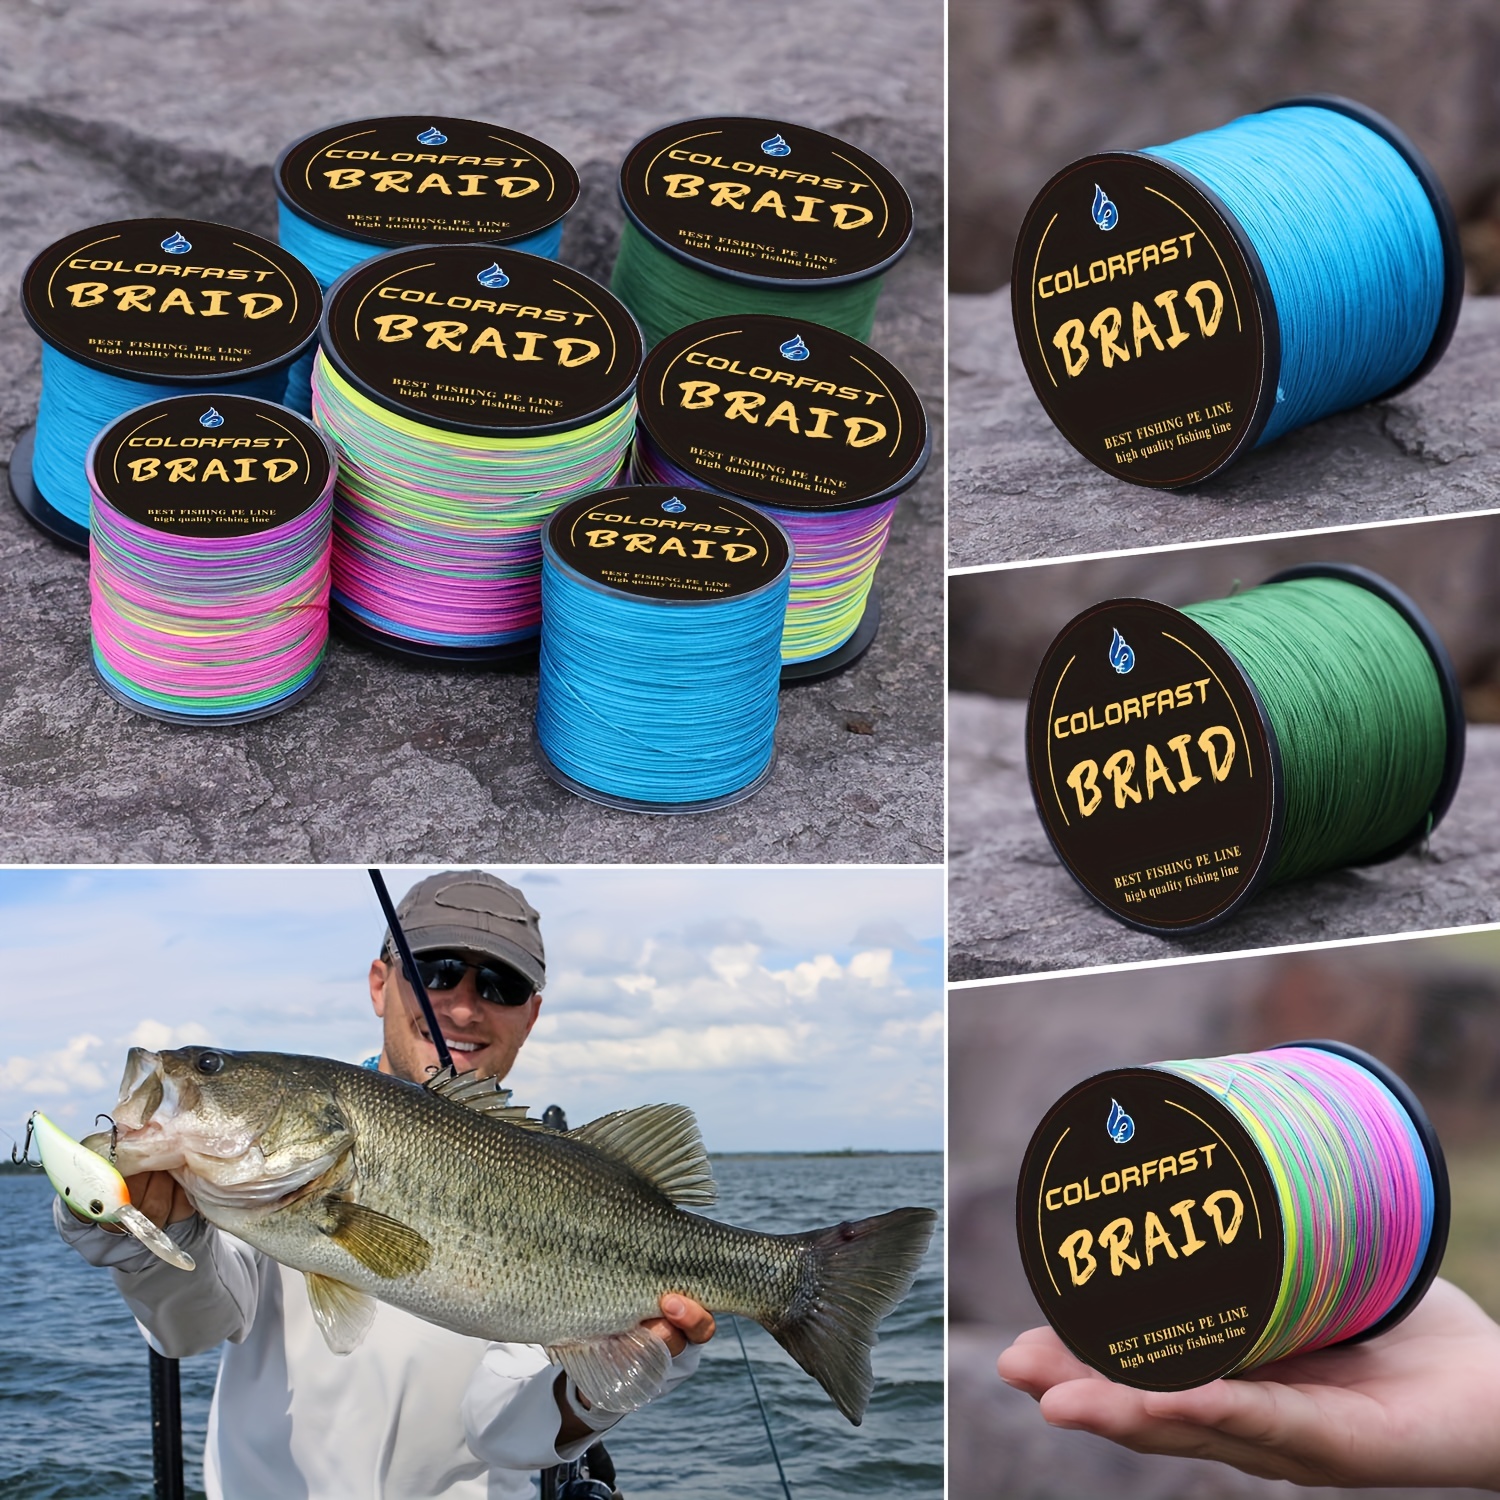 Find More Fishing Lines Information about 8 Strands Braided Fishing line  500m Multi Color Super Strong Japan Multifilament PE …